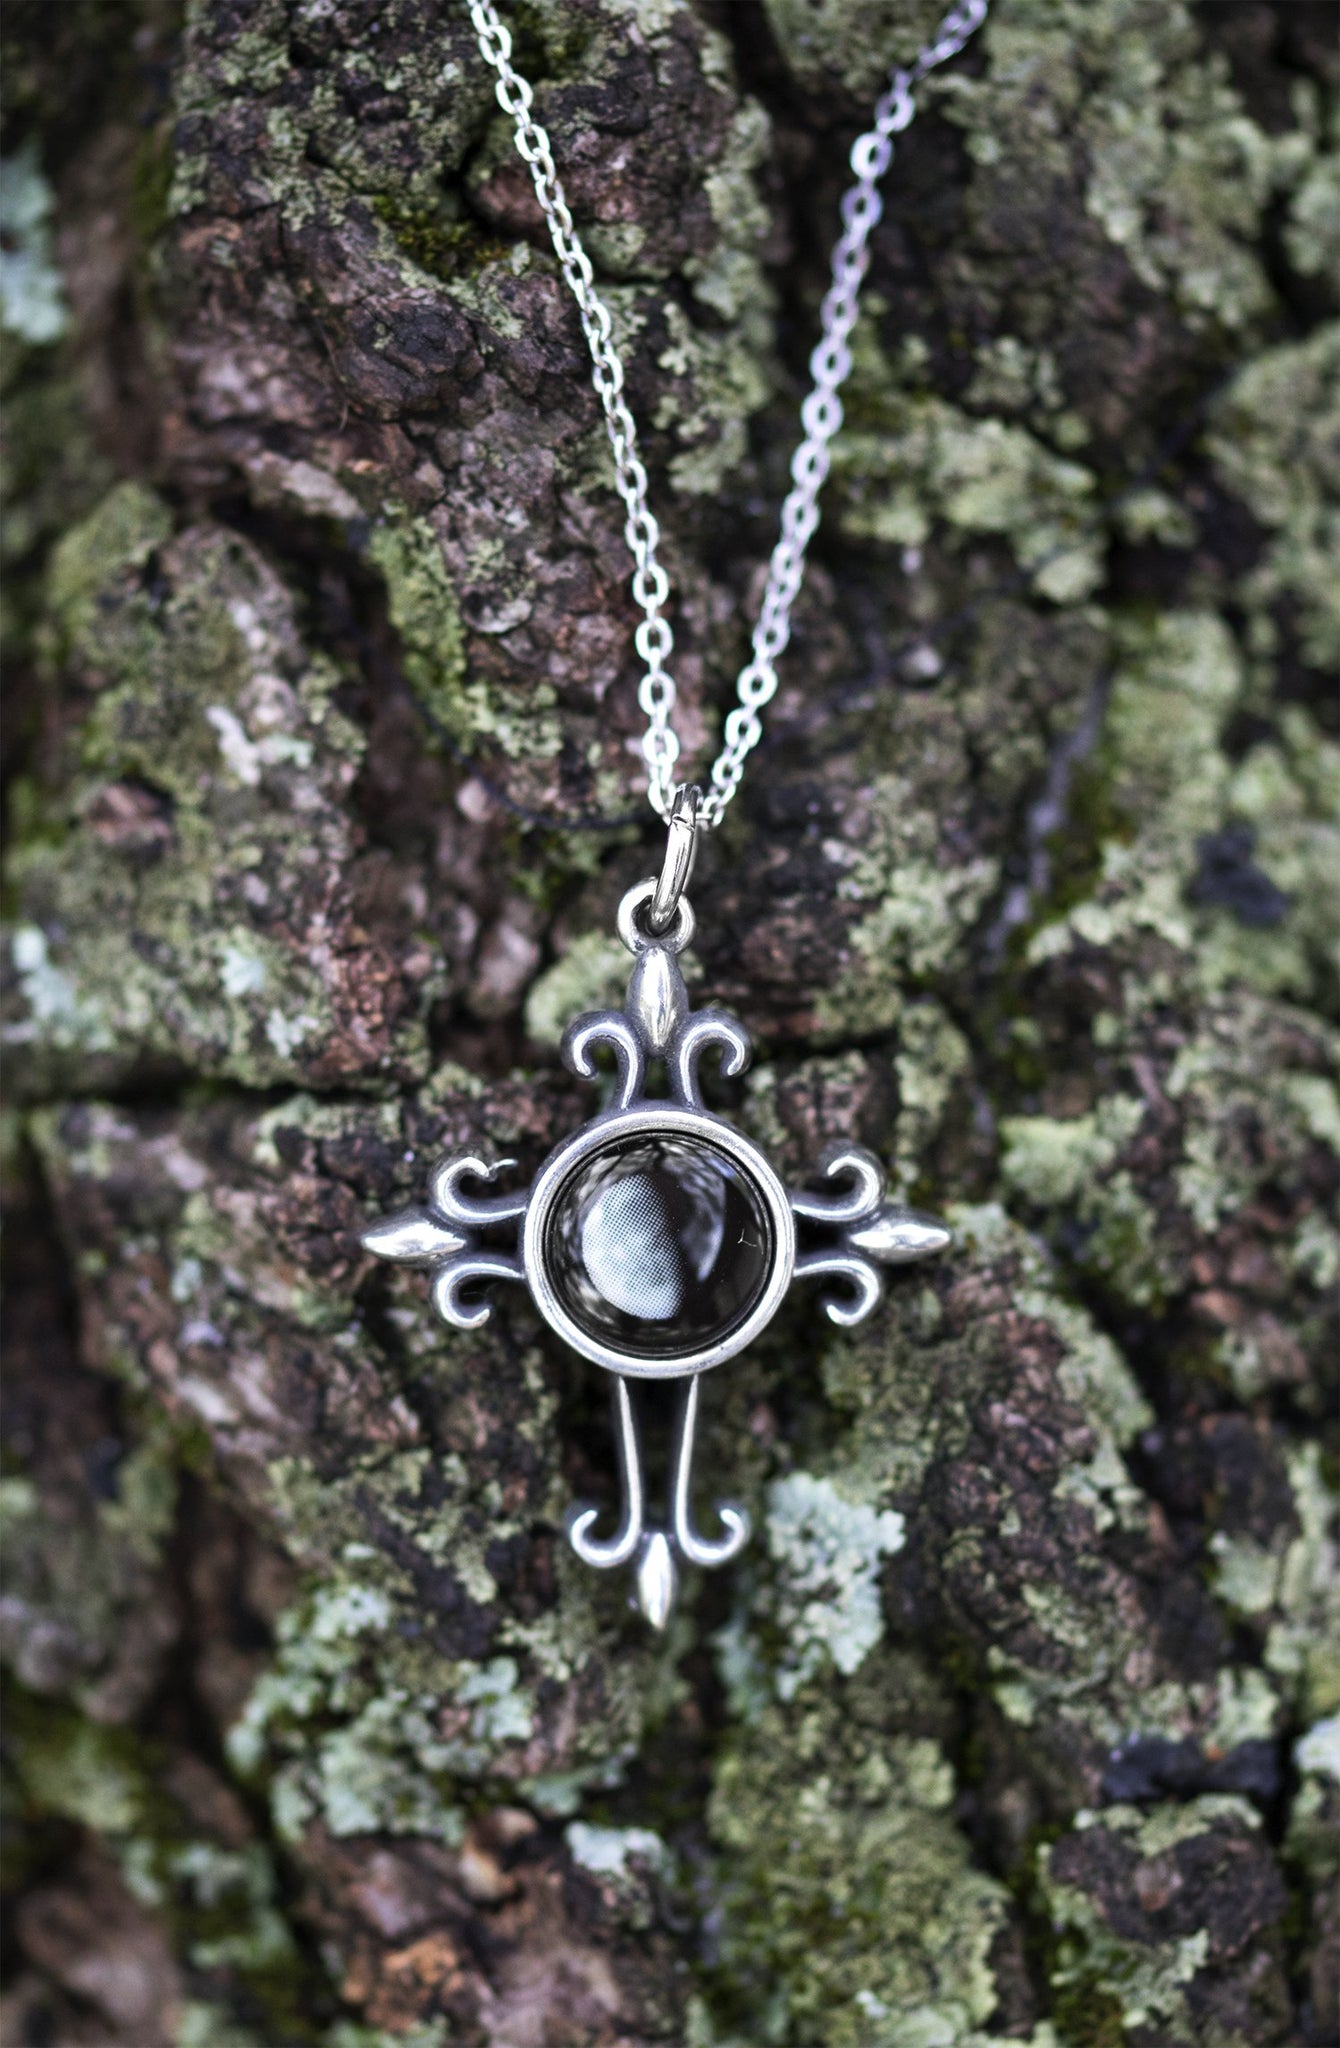 Medieval Cross Necklace